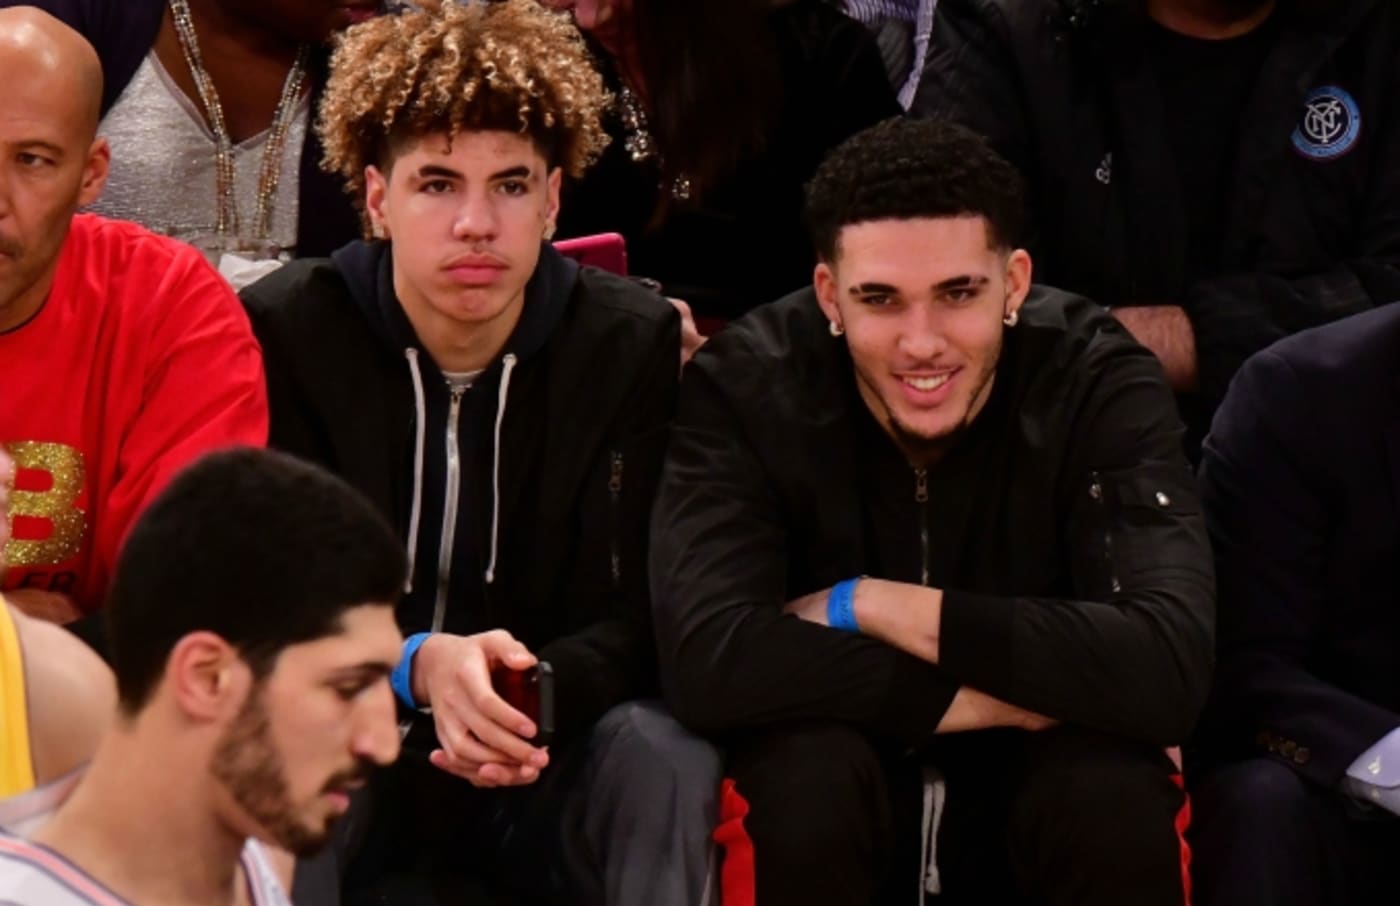 LaMelo and LiAngelo Ball at a Lakers game.